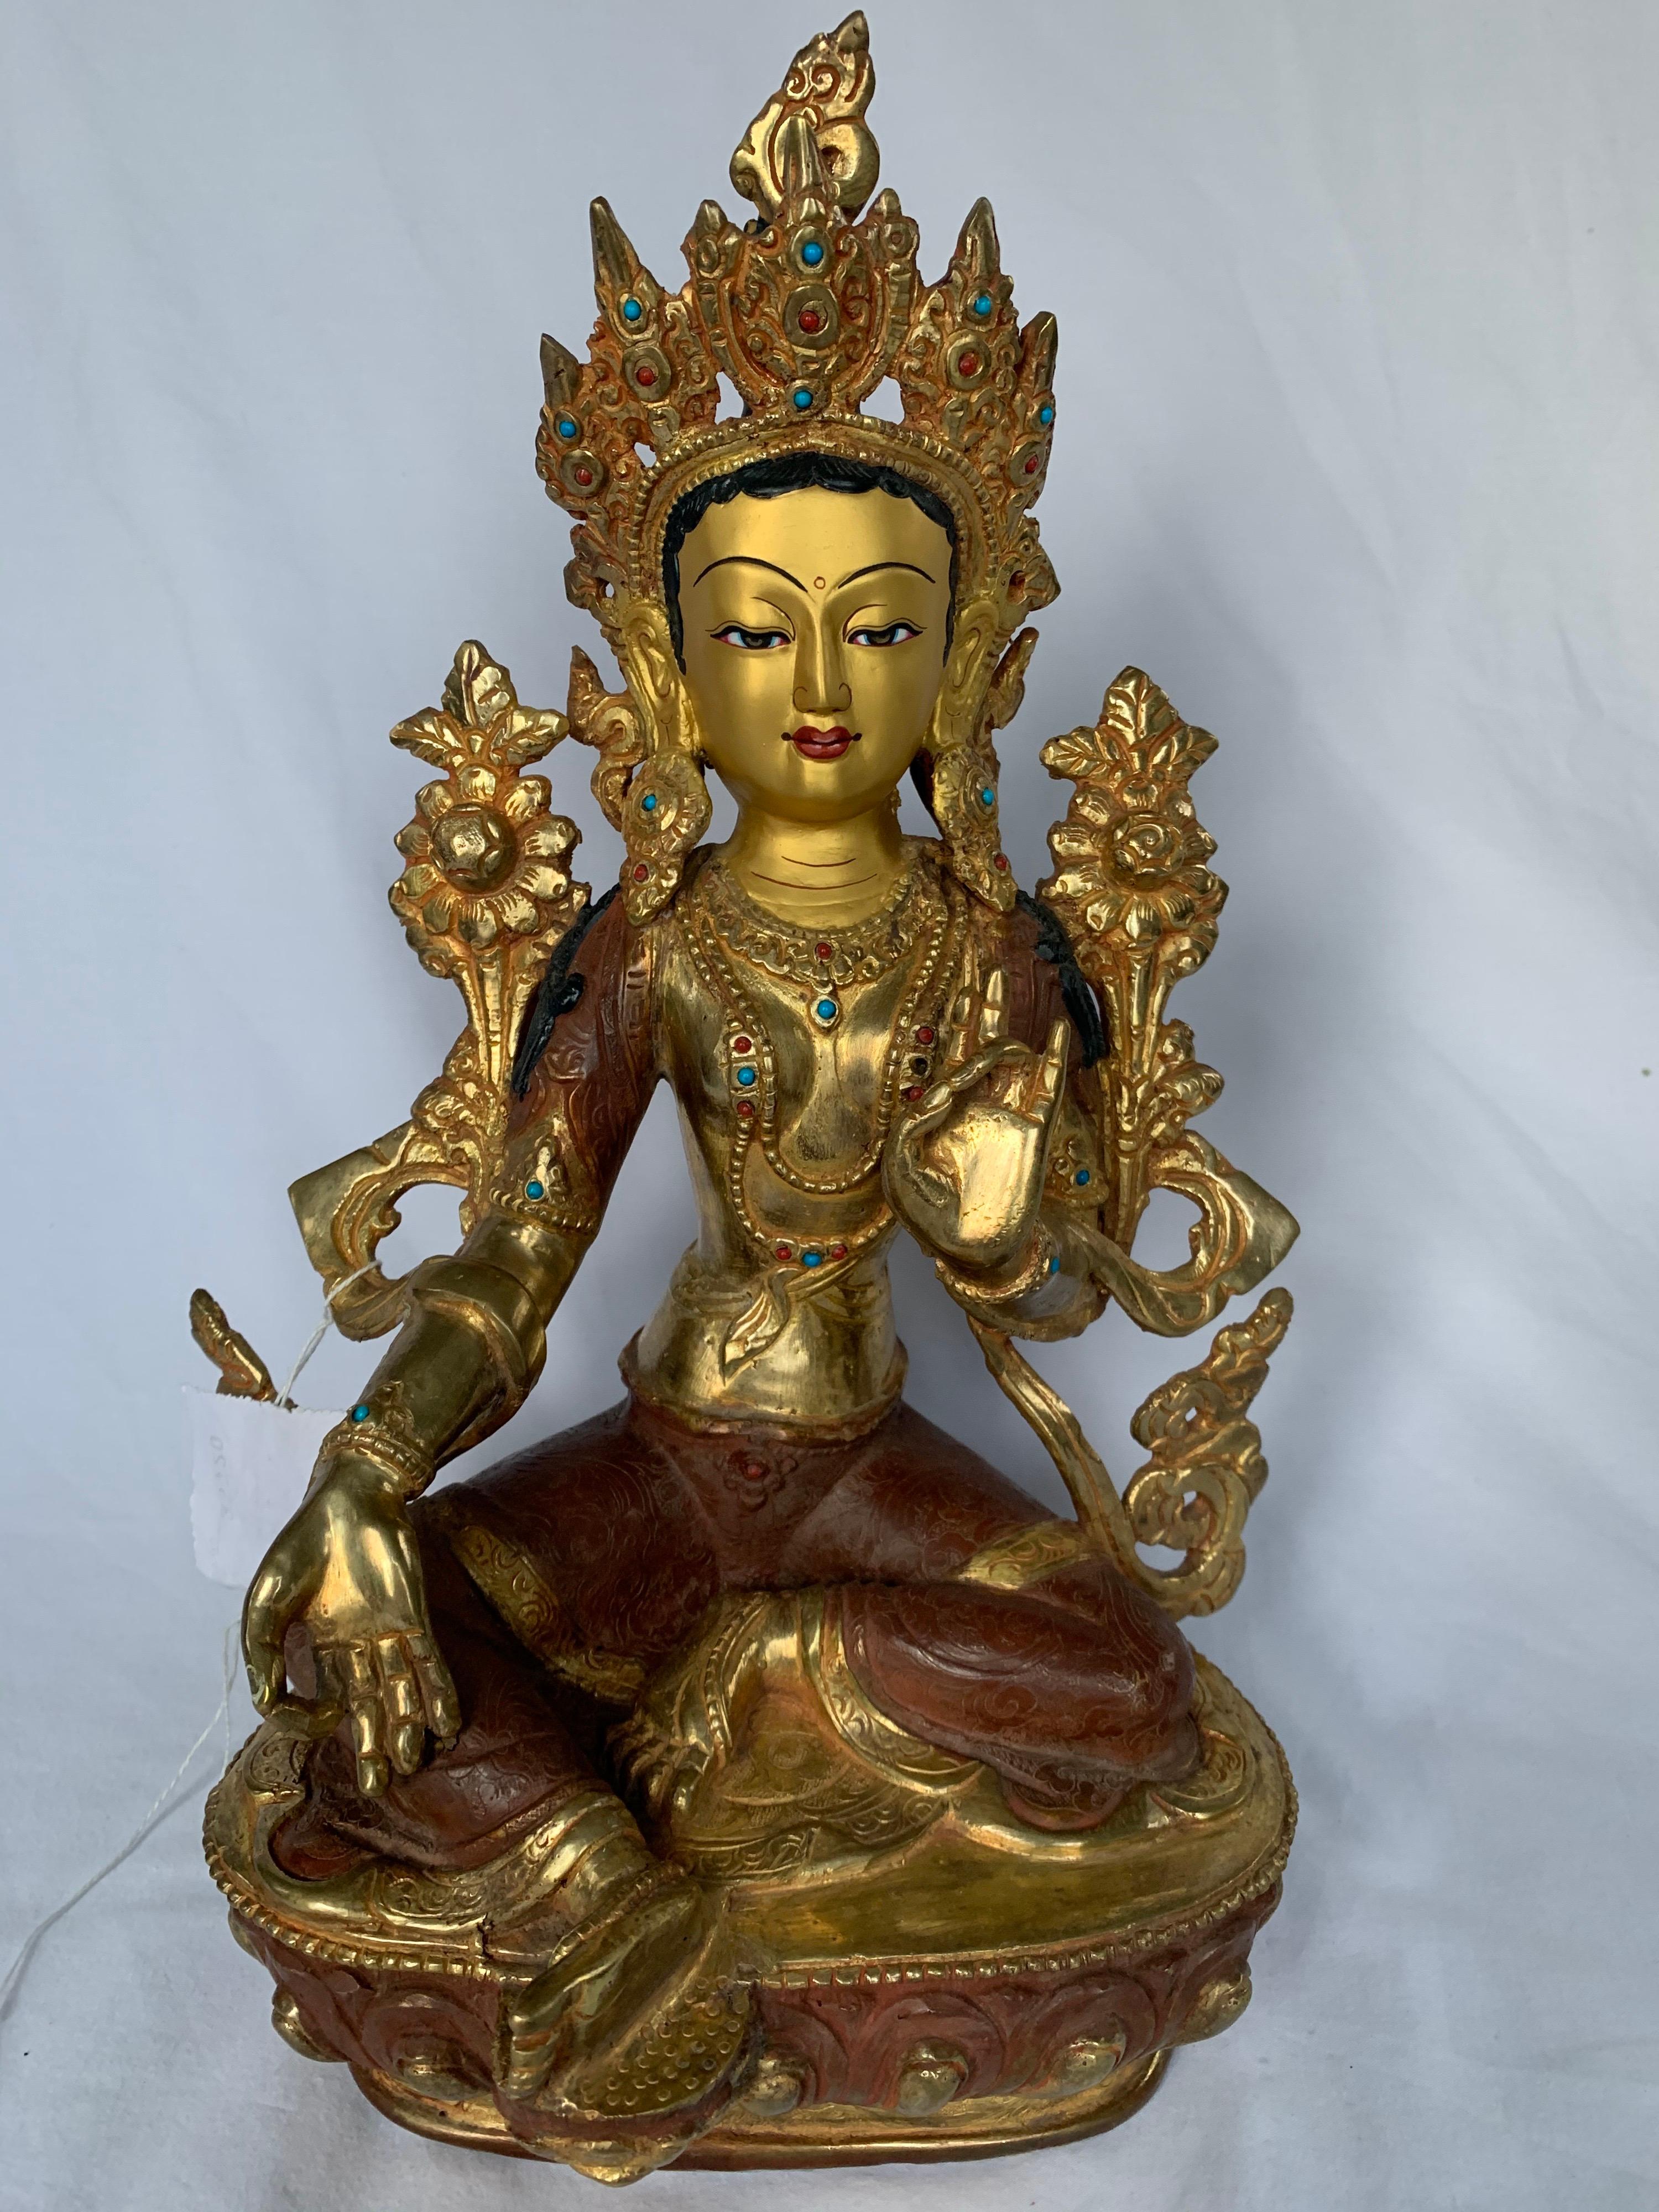 Green Tara Statue 12.5 Inch with 24K Gold Handcrafted by Lost Wax Process